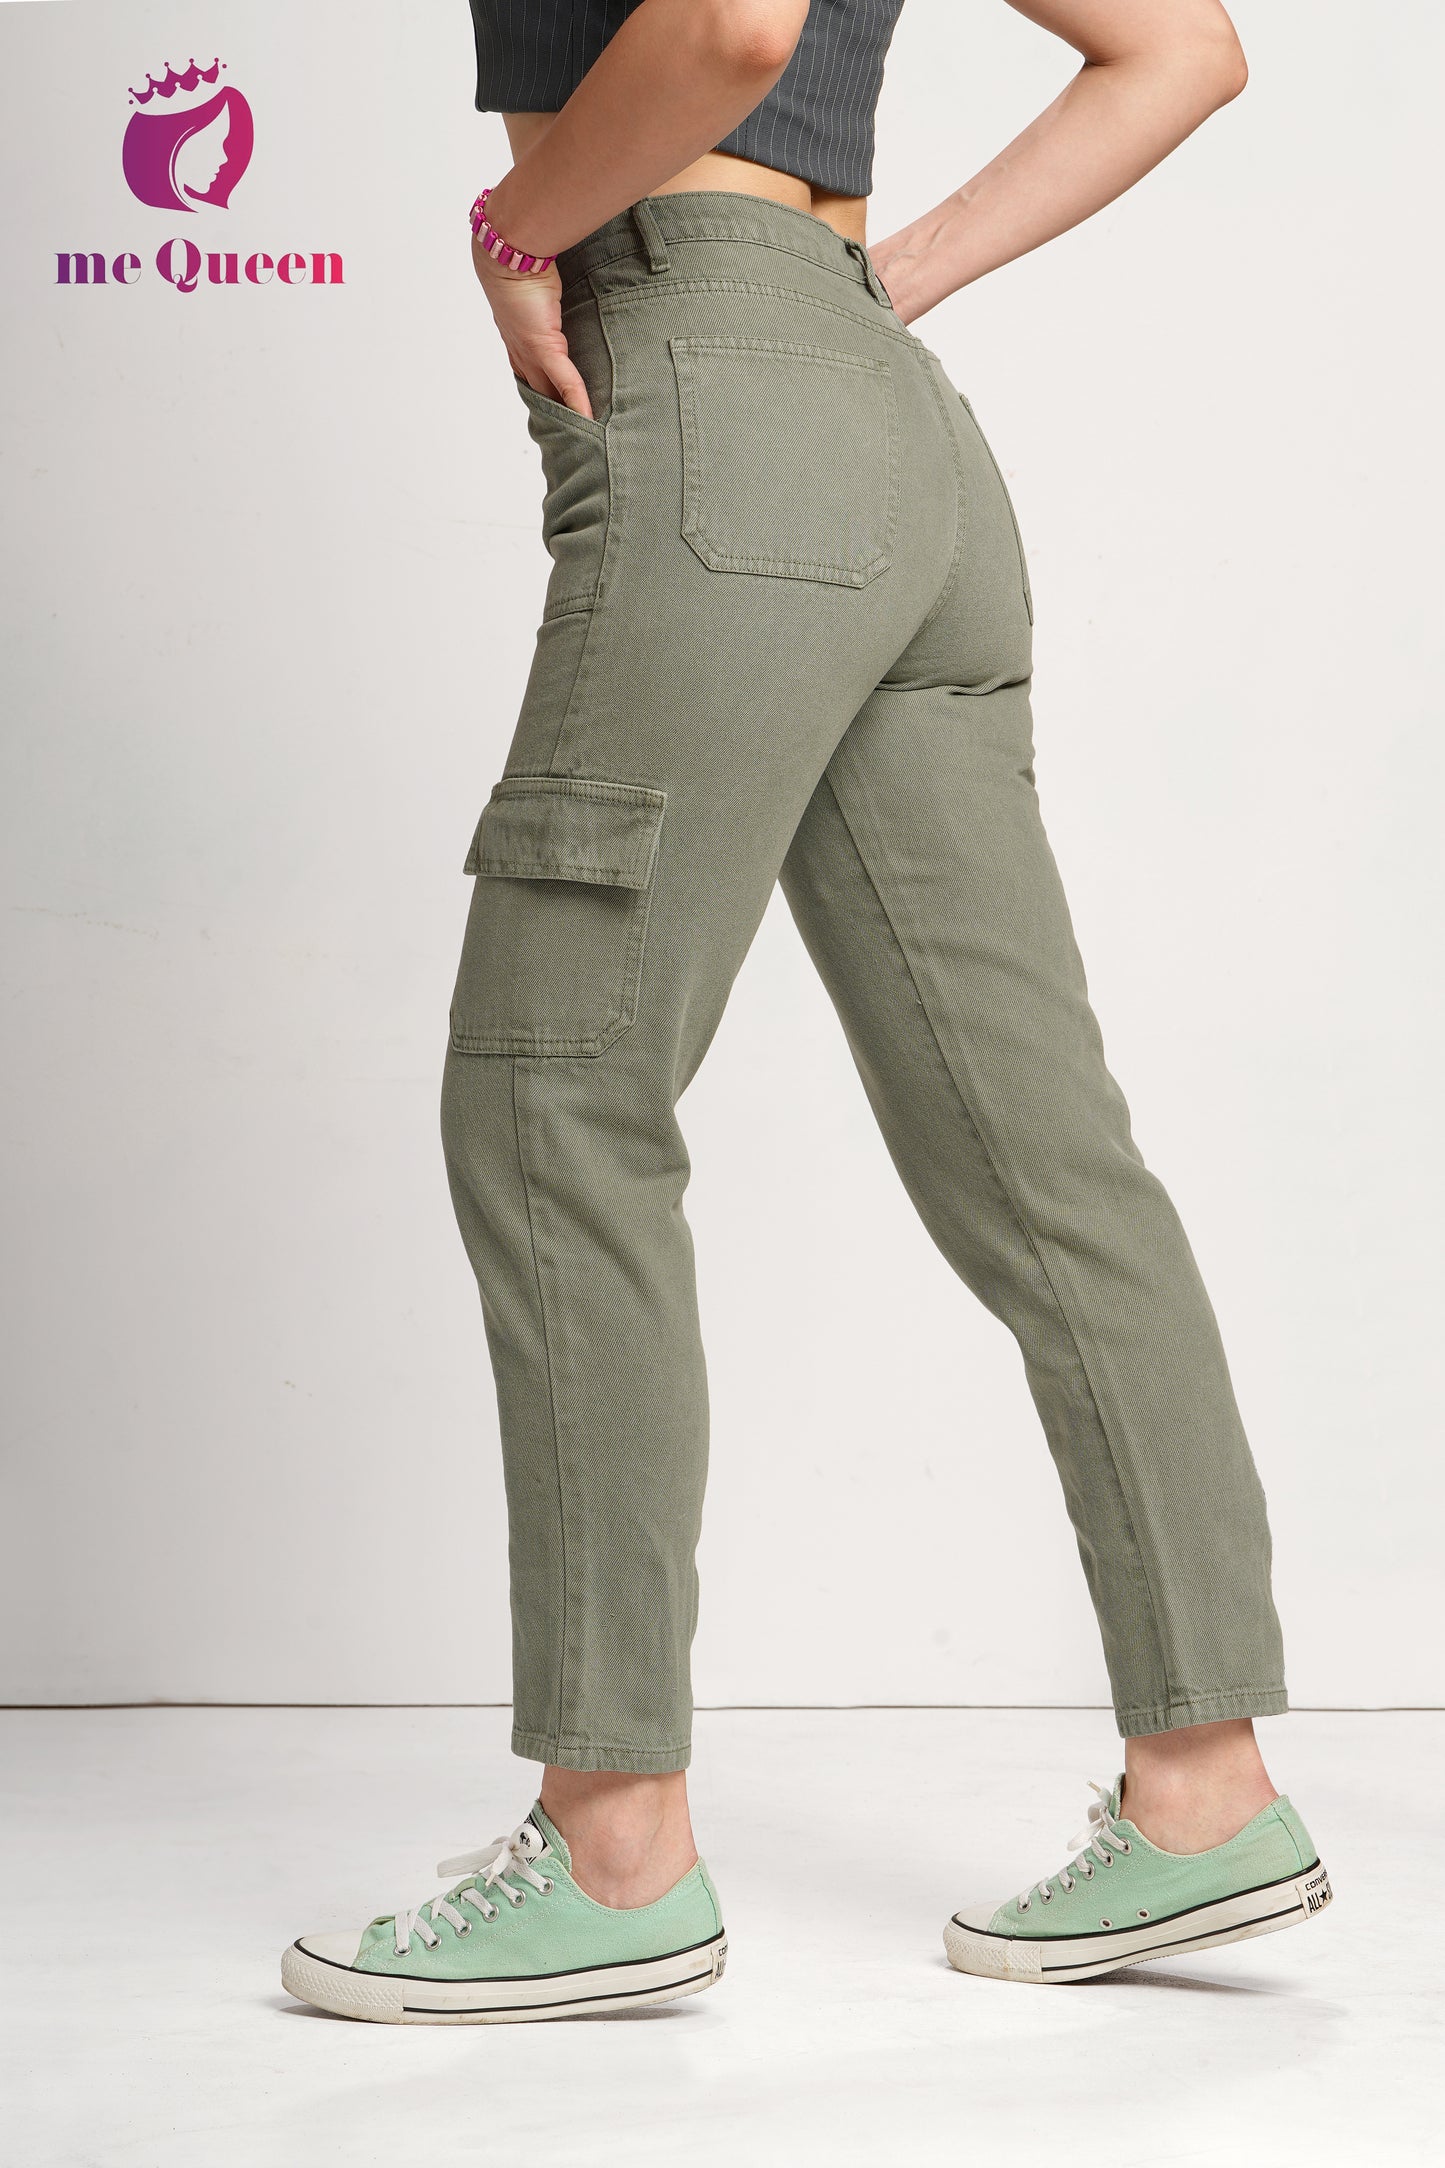 MeQueen Women's Olive Drab Fit Denim Jeans with Handy Pockets